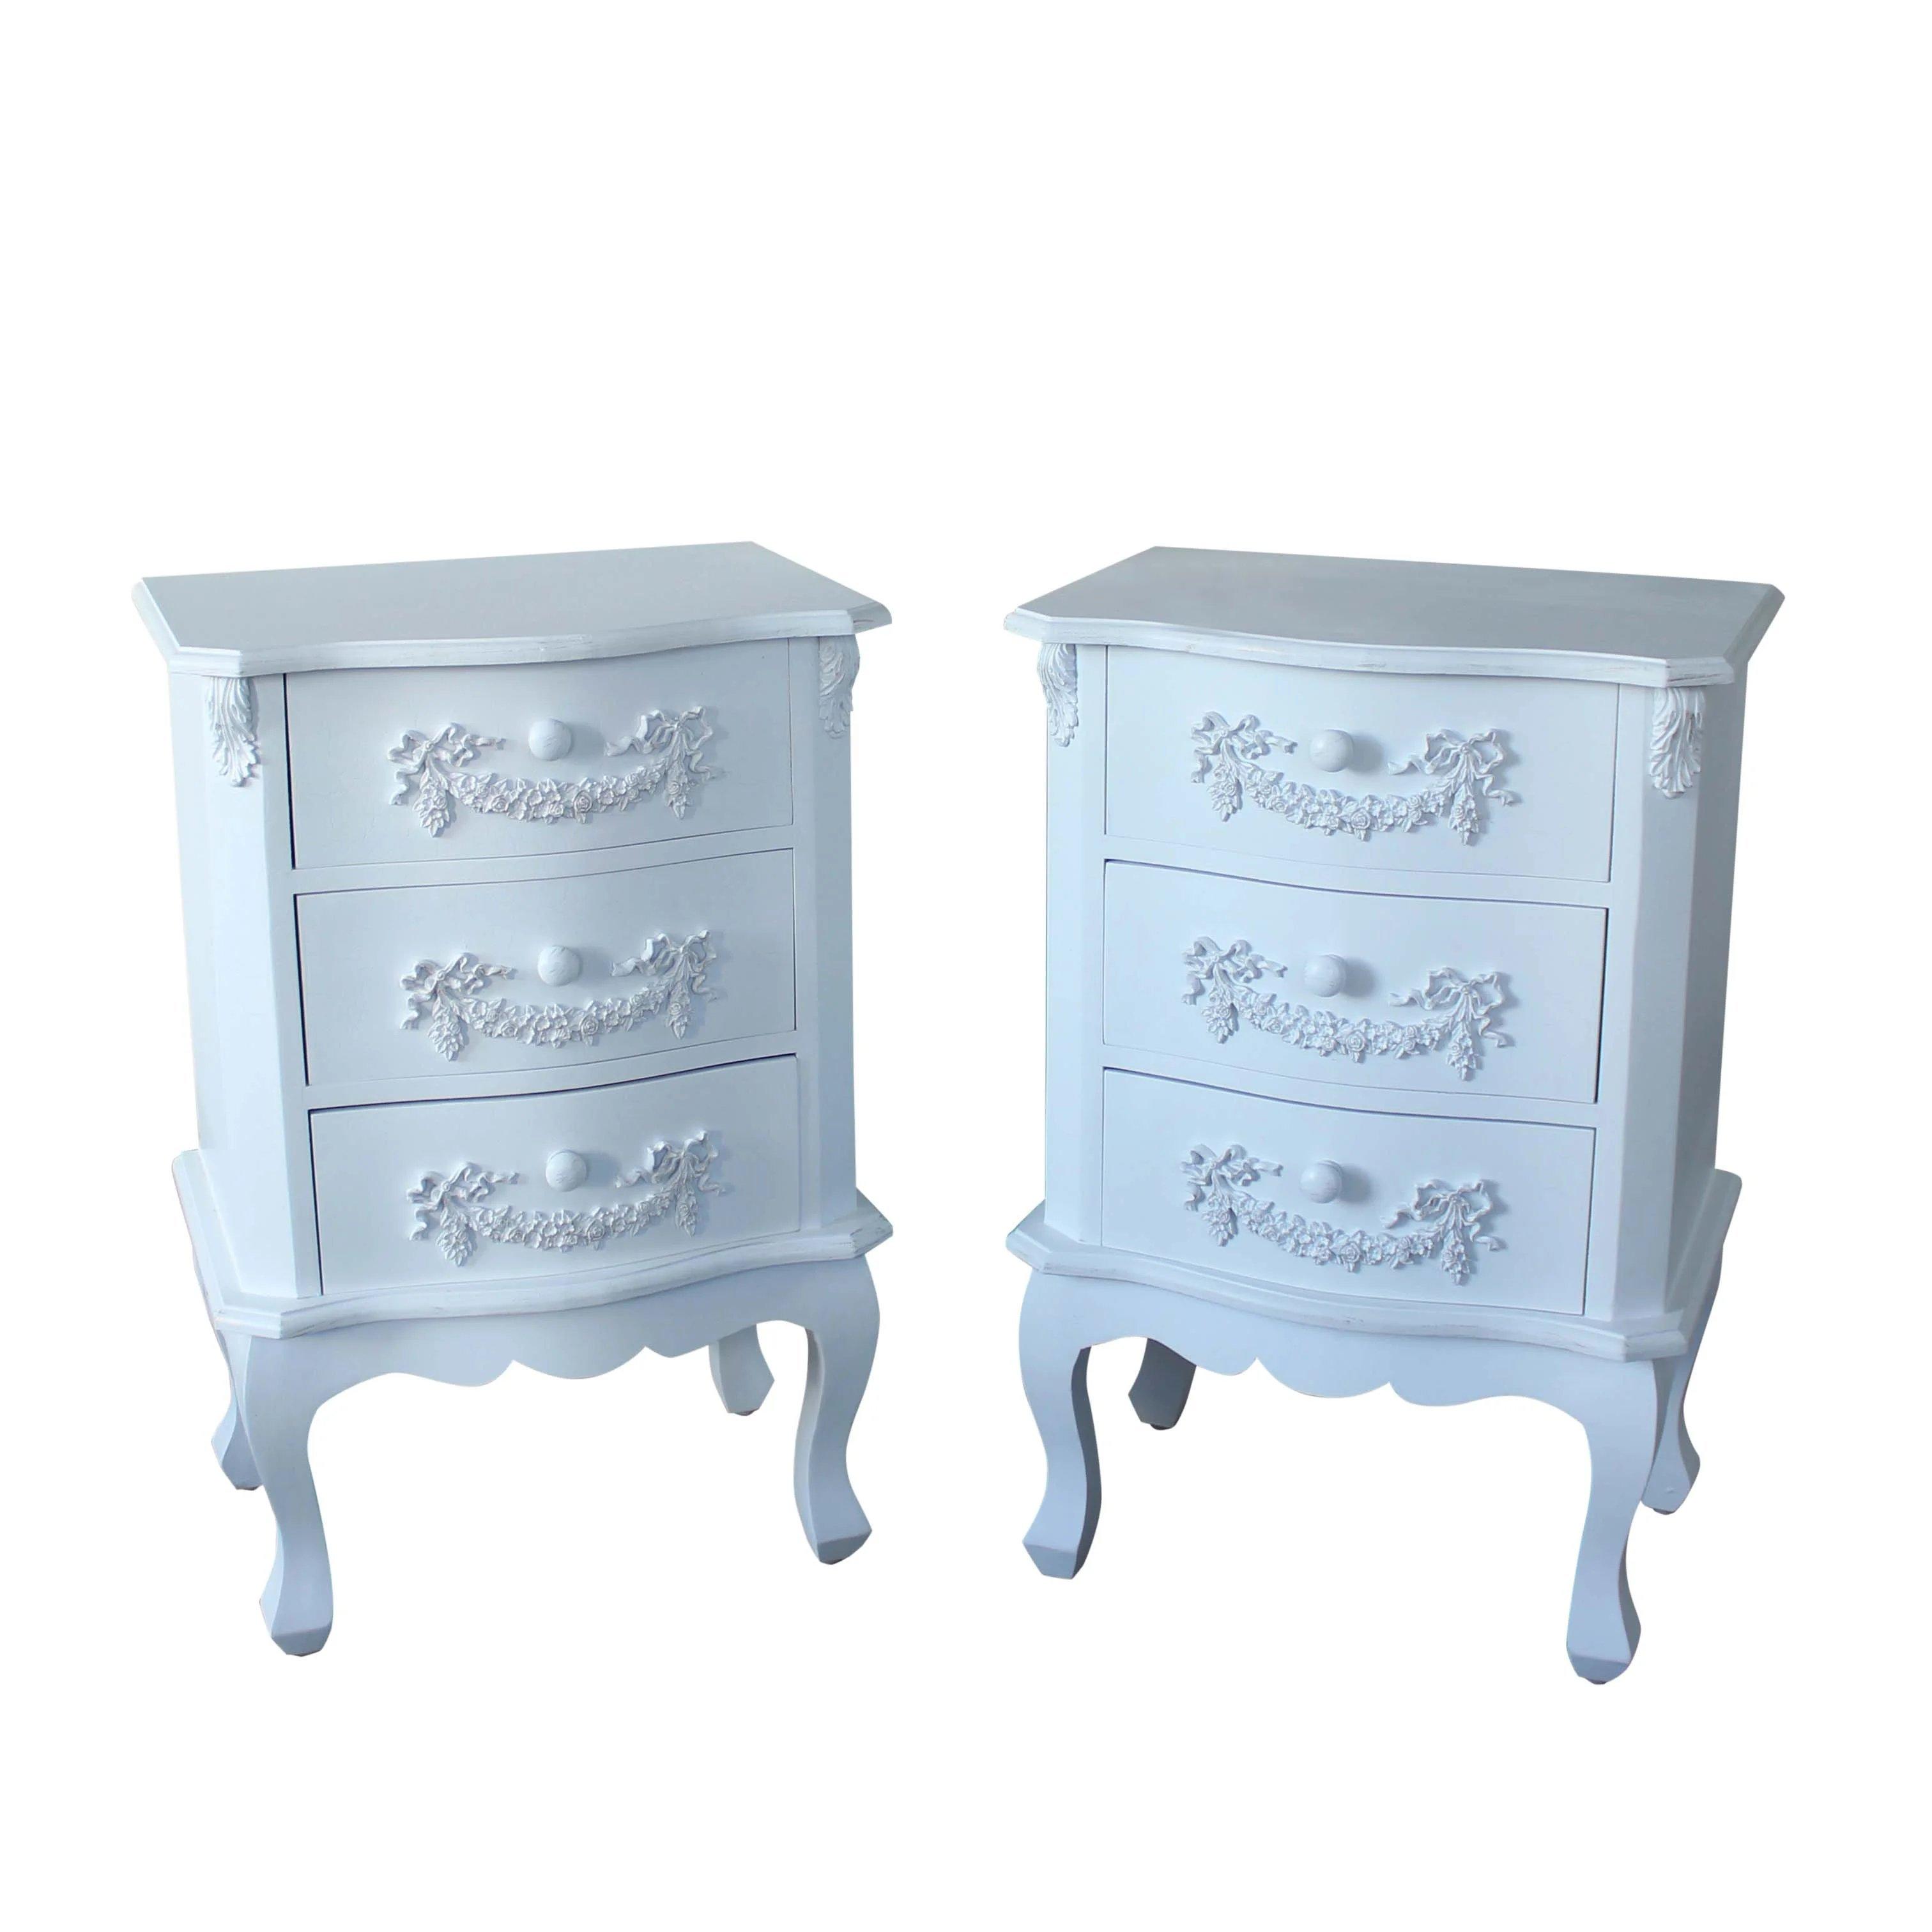 White Bedroom Furniture, Pair Of Antique White 3 Drawer Bedside Table - Pays Blanc Range